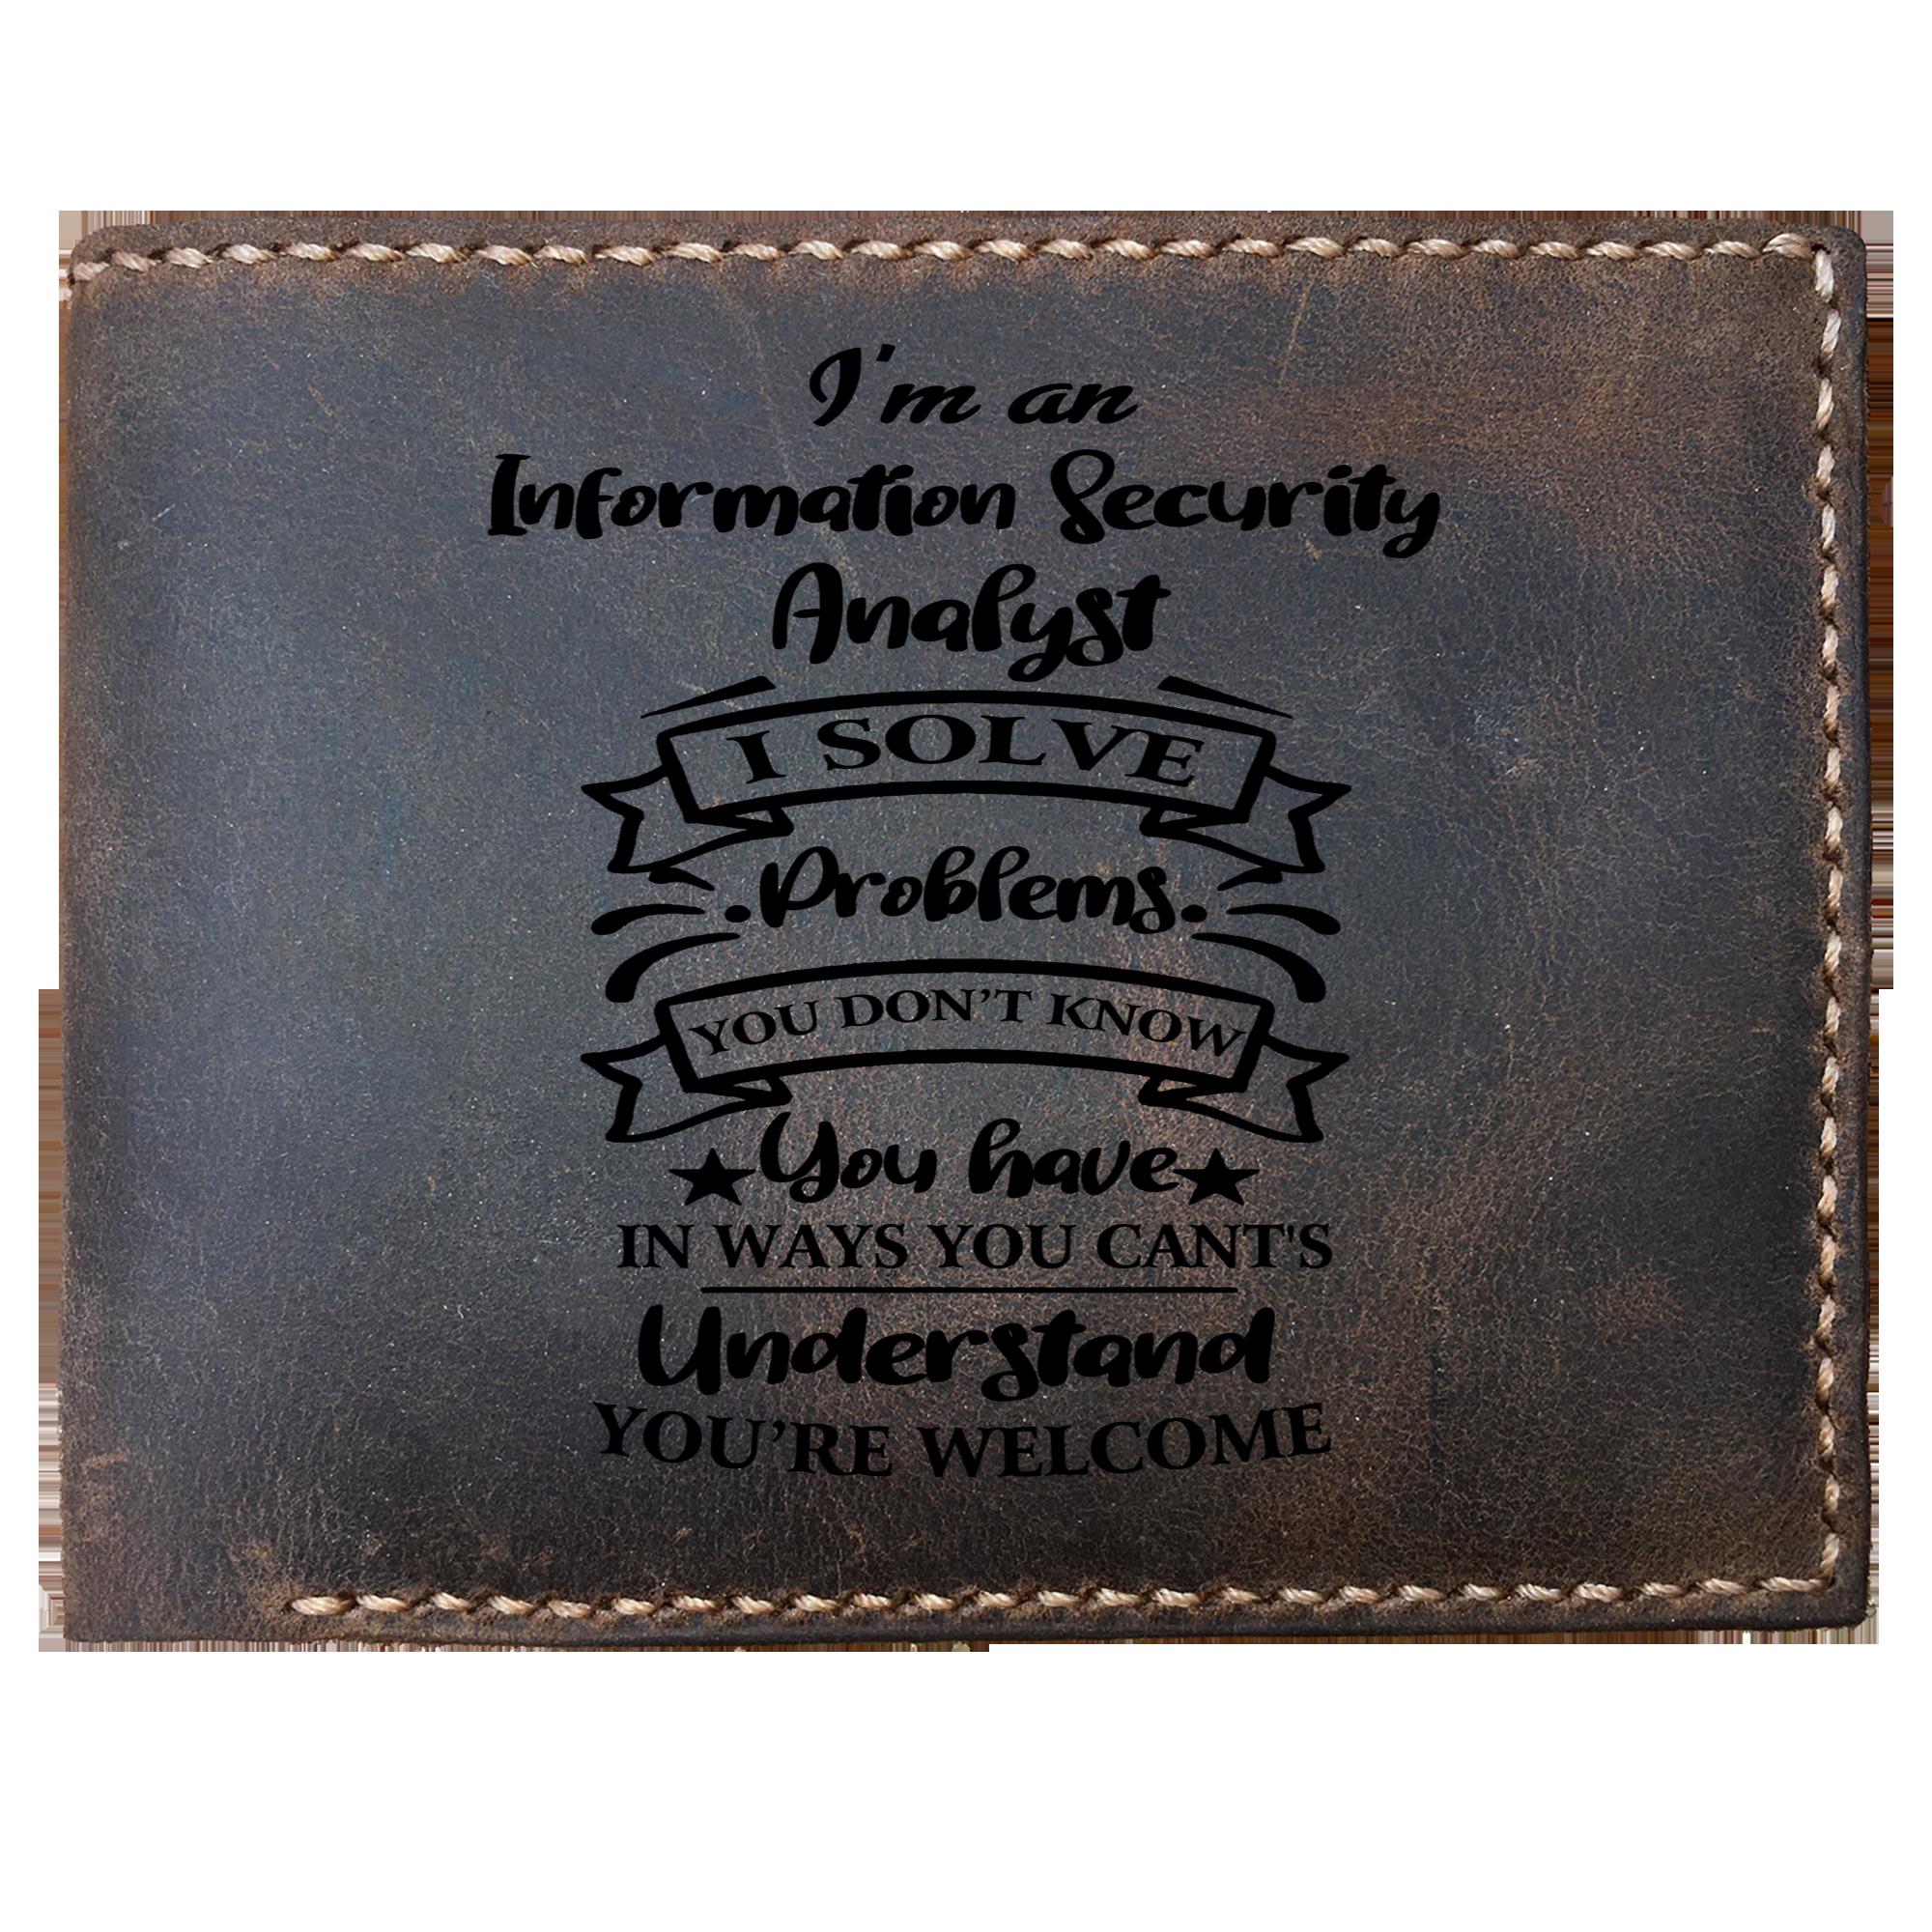 Skitongifts Funny Custom Laser Engraved Bifold Leather Wallet For Men, I'm an Information Security Analyst Solve Problems, Father's Day Gifts